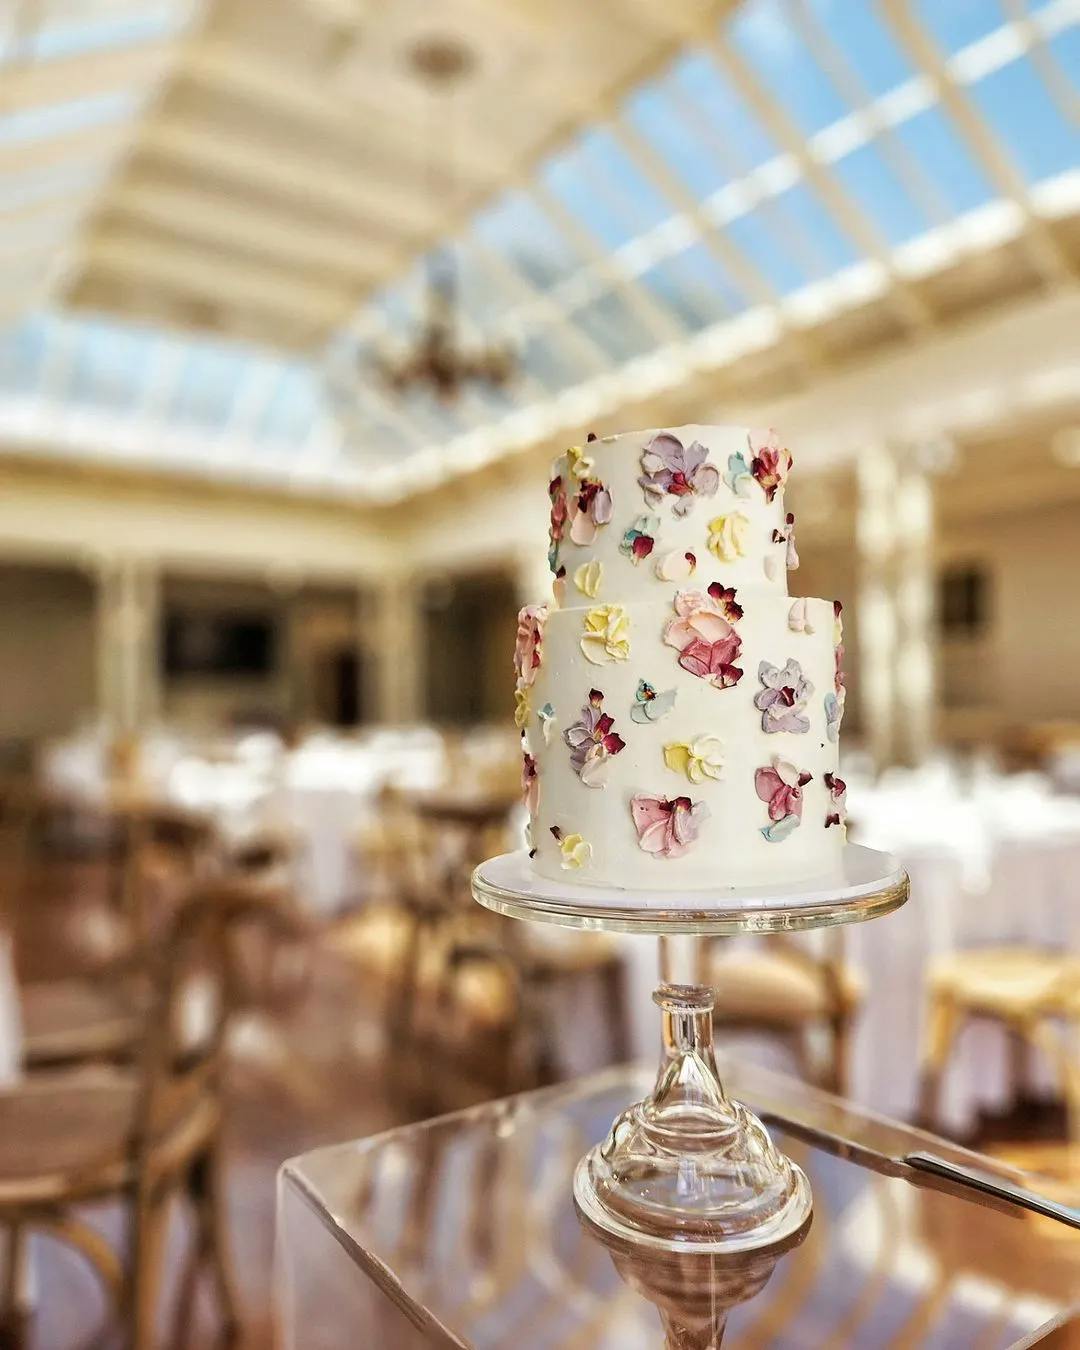 A two-tiered white wedding cake decorated with colorful flower petals is displayed on a glass stand. The background features a bright, elegant venue with wooden chairs and round tables covered in white tablecloths under a skylight ceiling.